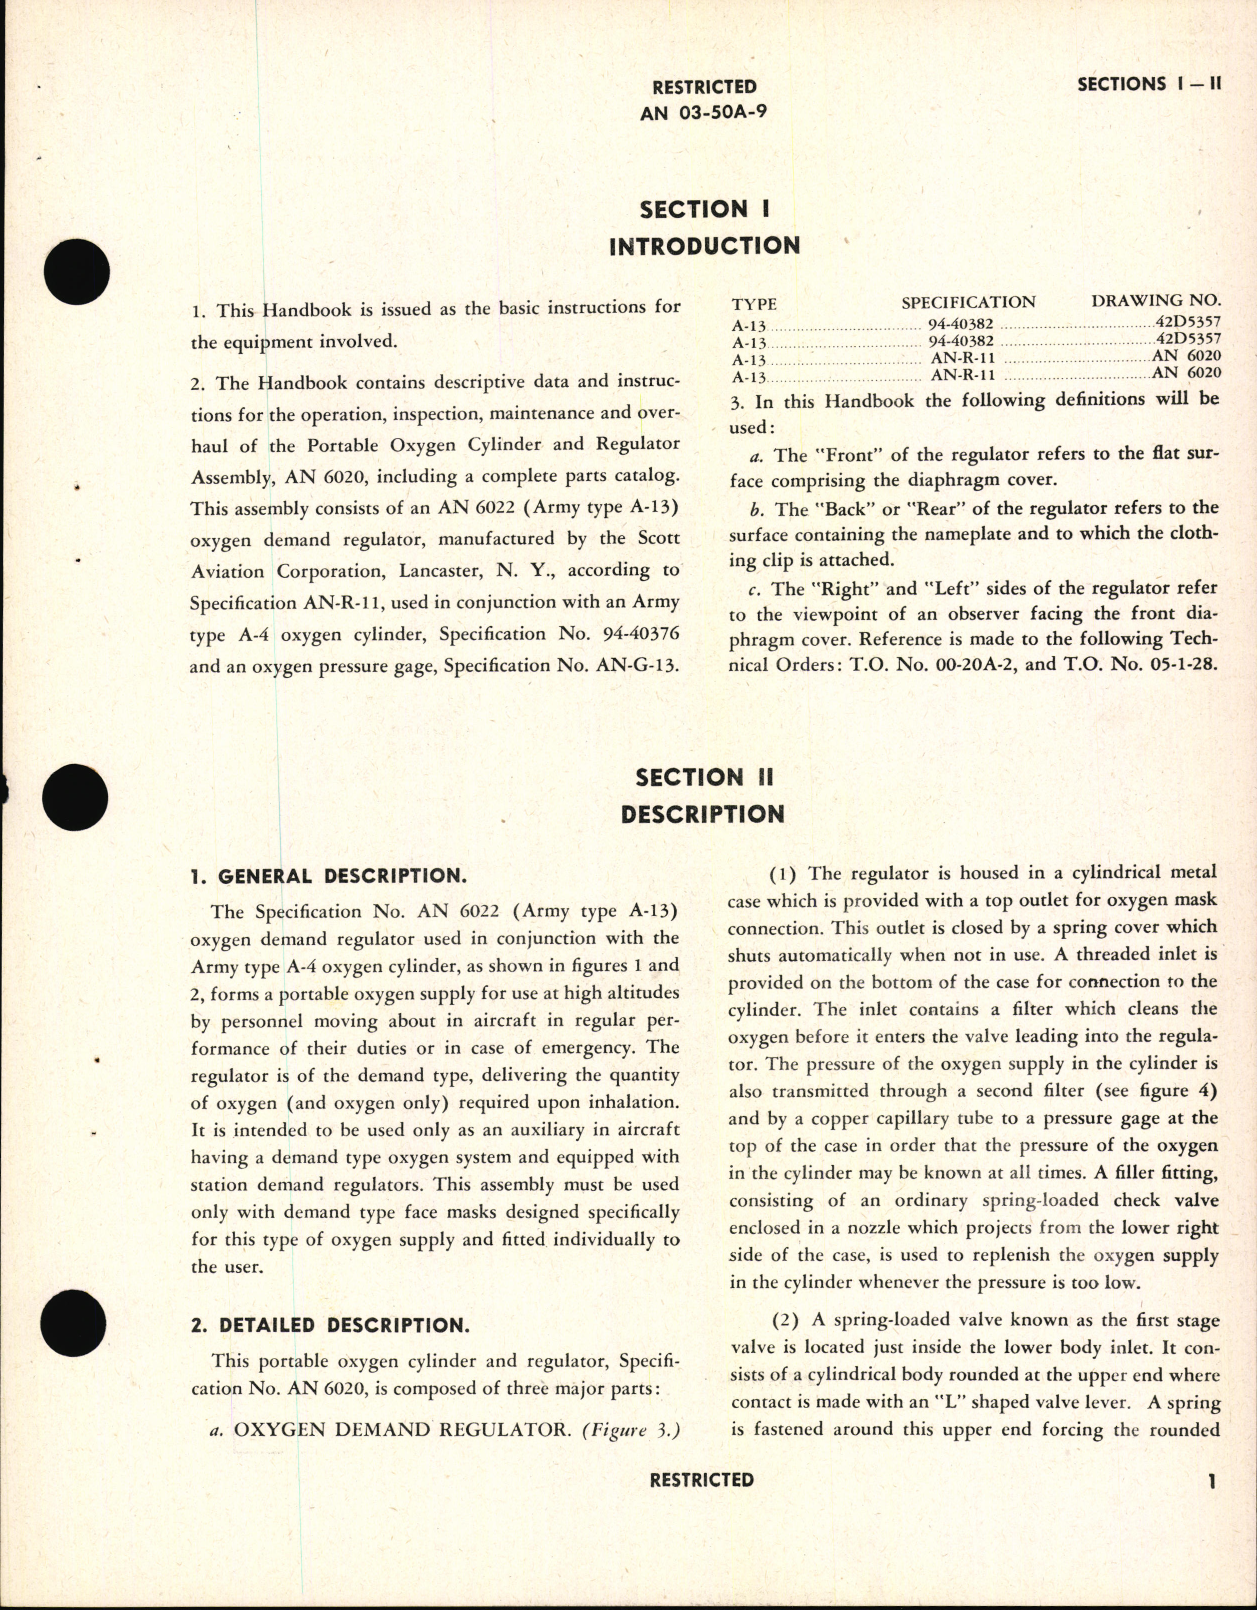 Sample page 5 from AirCorps Library document: Handbook of Instructions with Parts Catalog for Type A-13 Portable Oxygen Demand Regulator